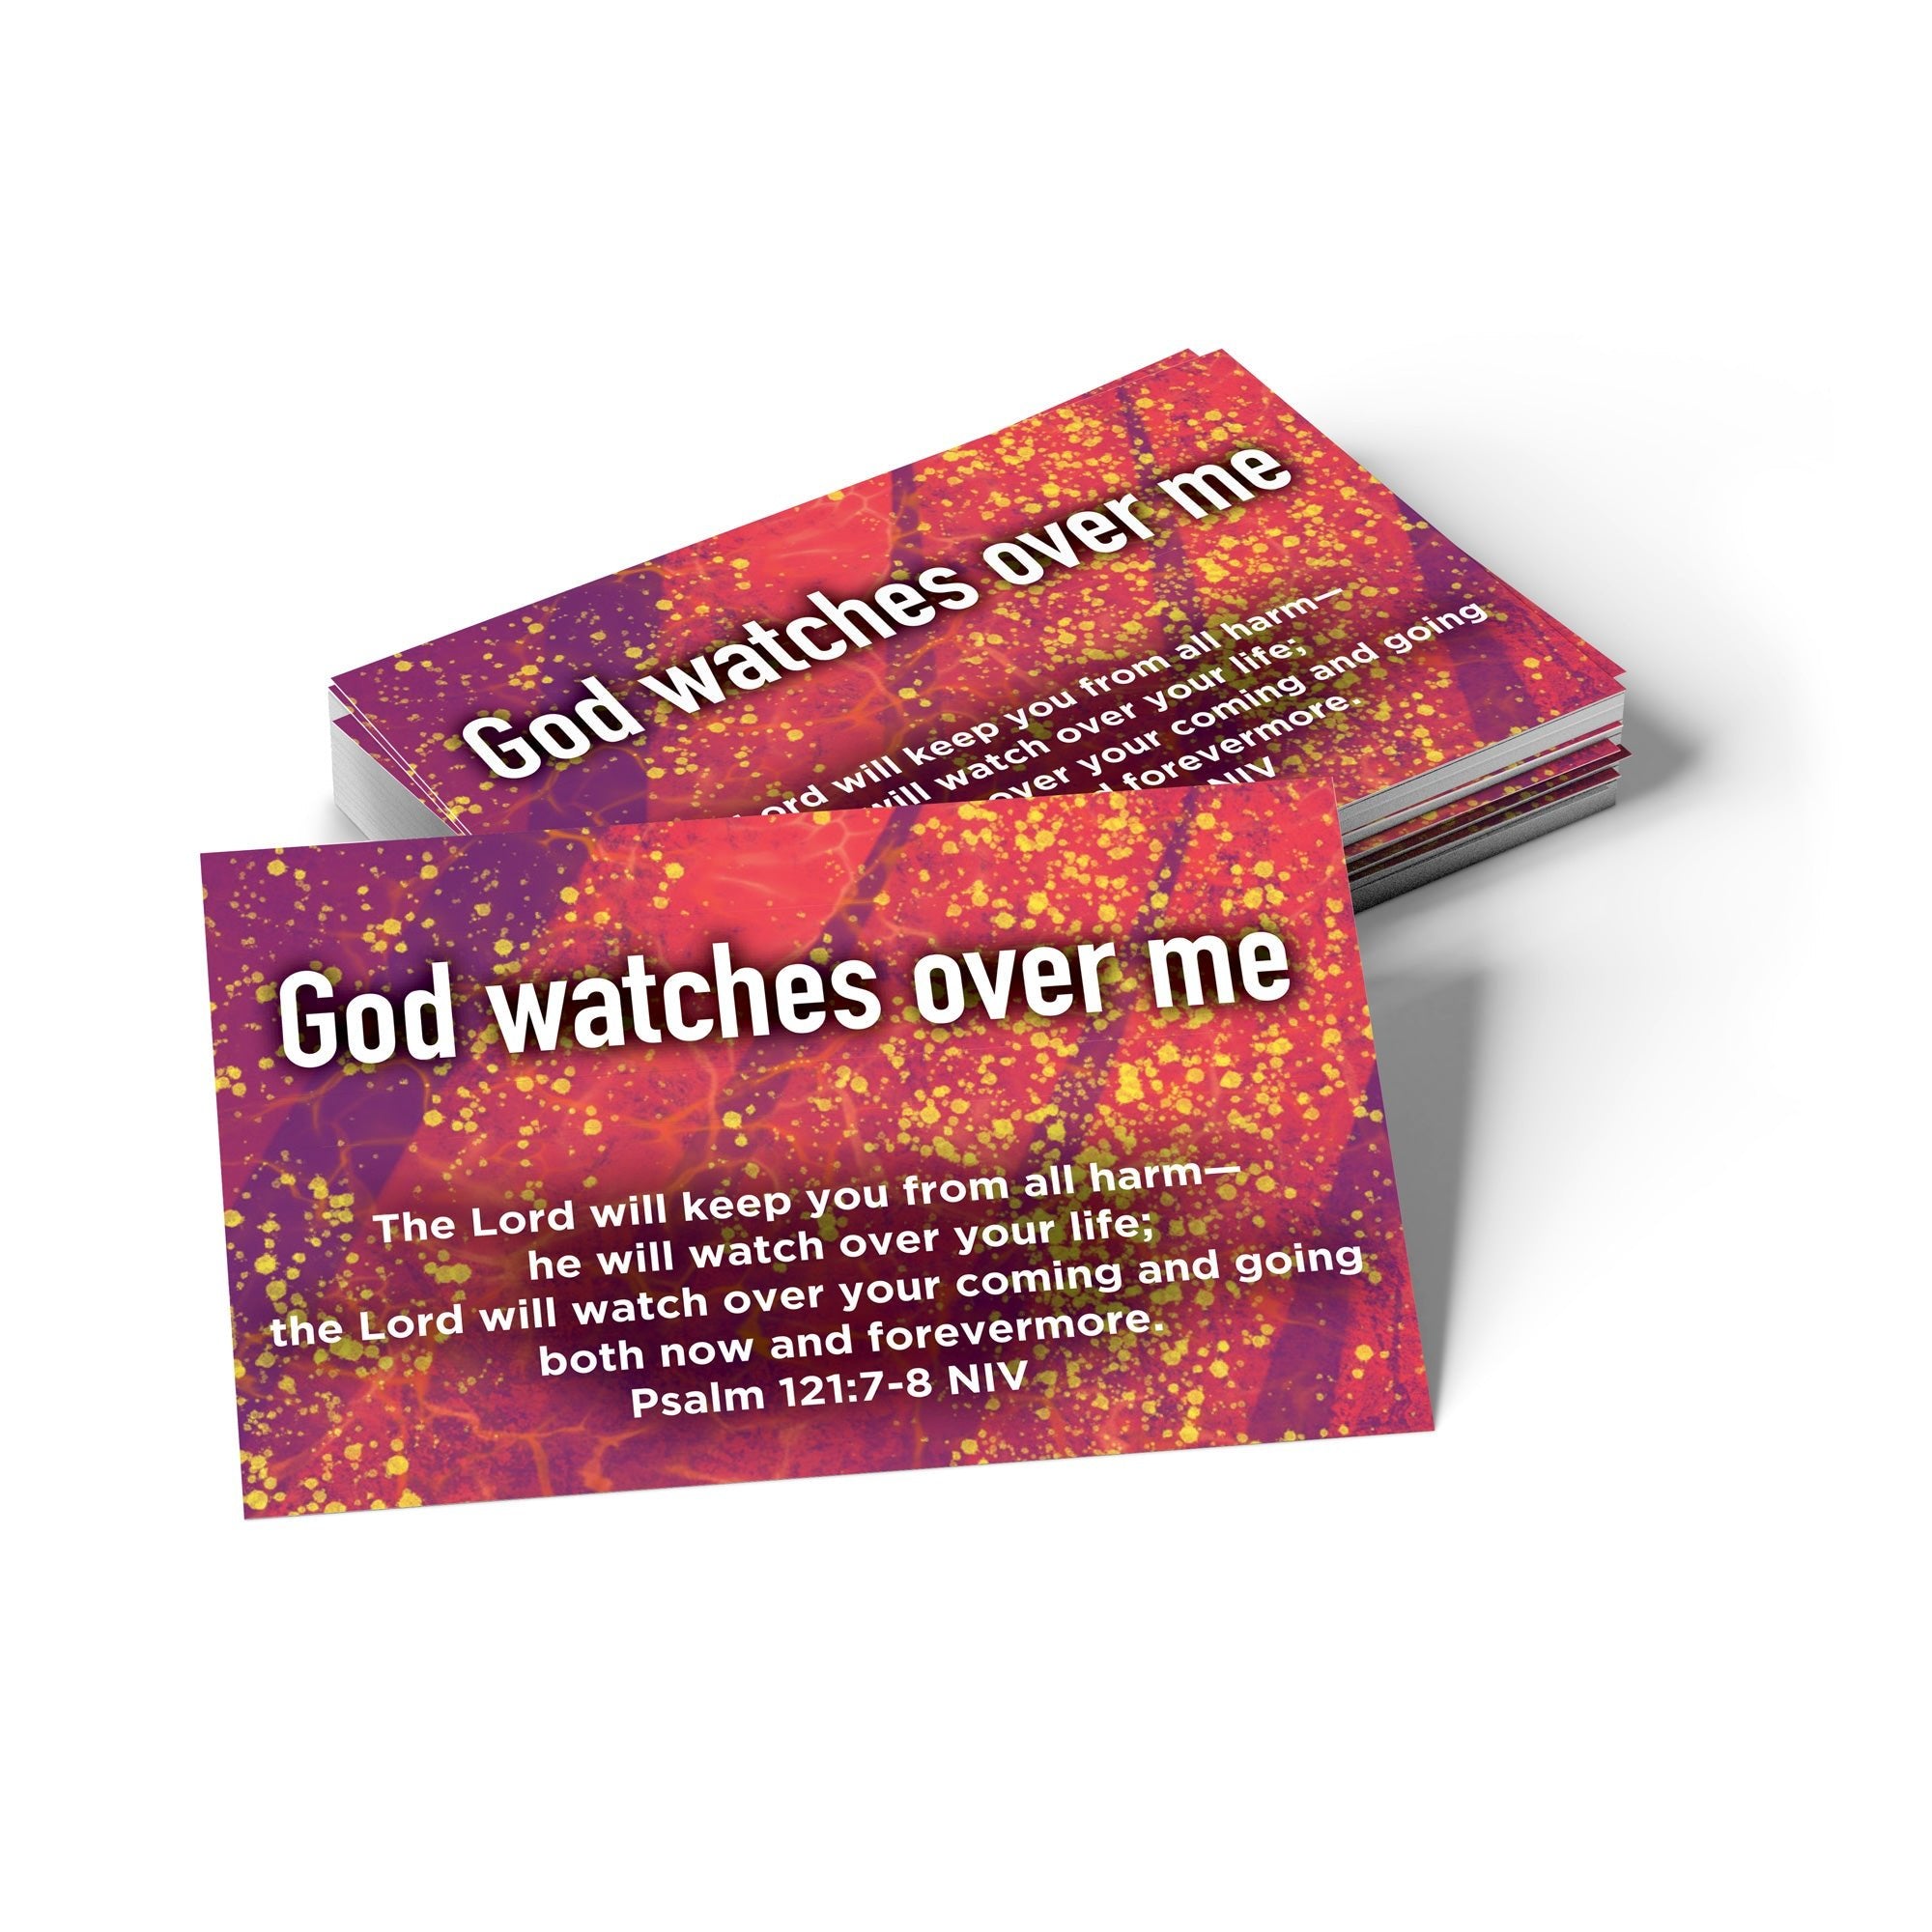 Children and Youth, Pass Along Scripture Cards, God Watches Over Me, Psalm 121:7-8, Pack of 25